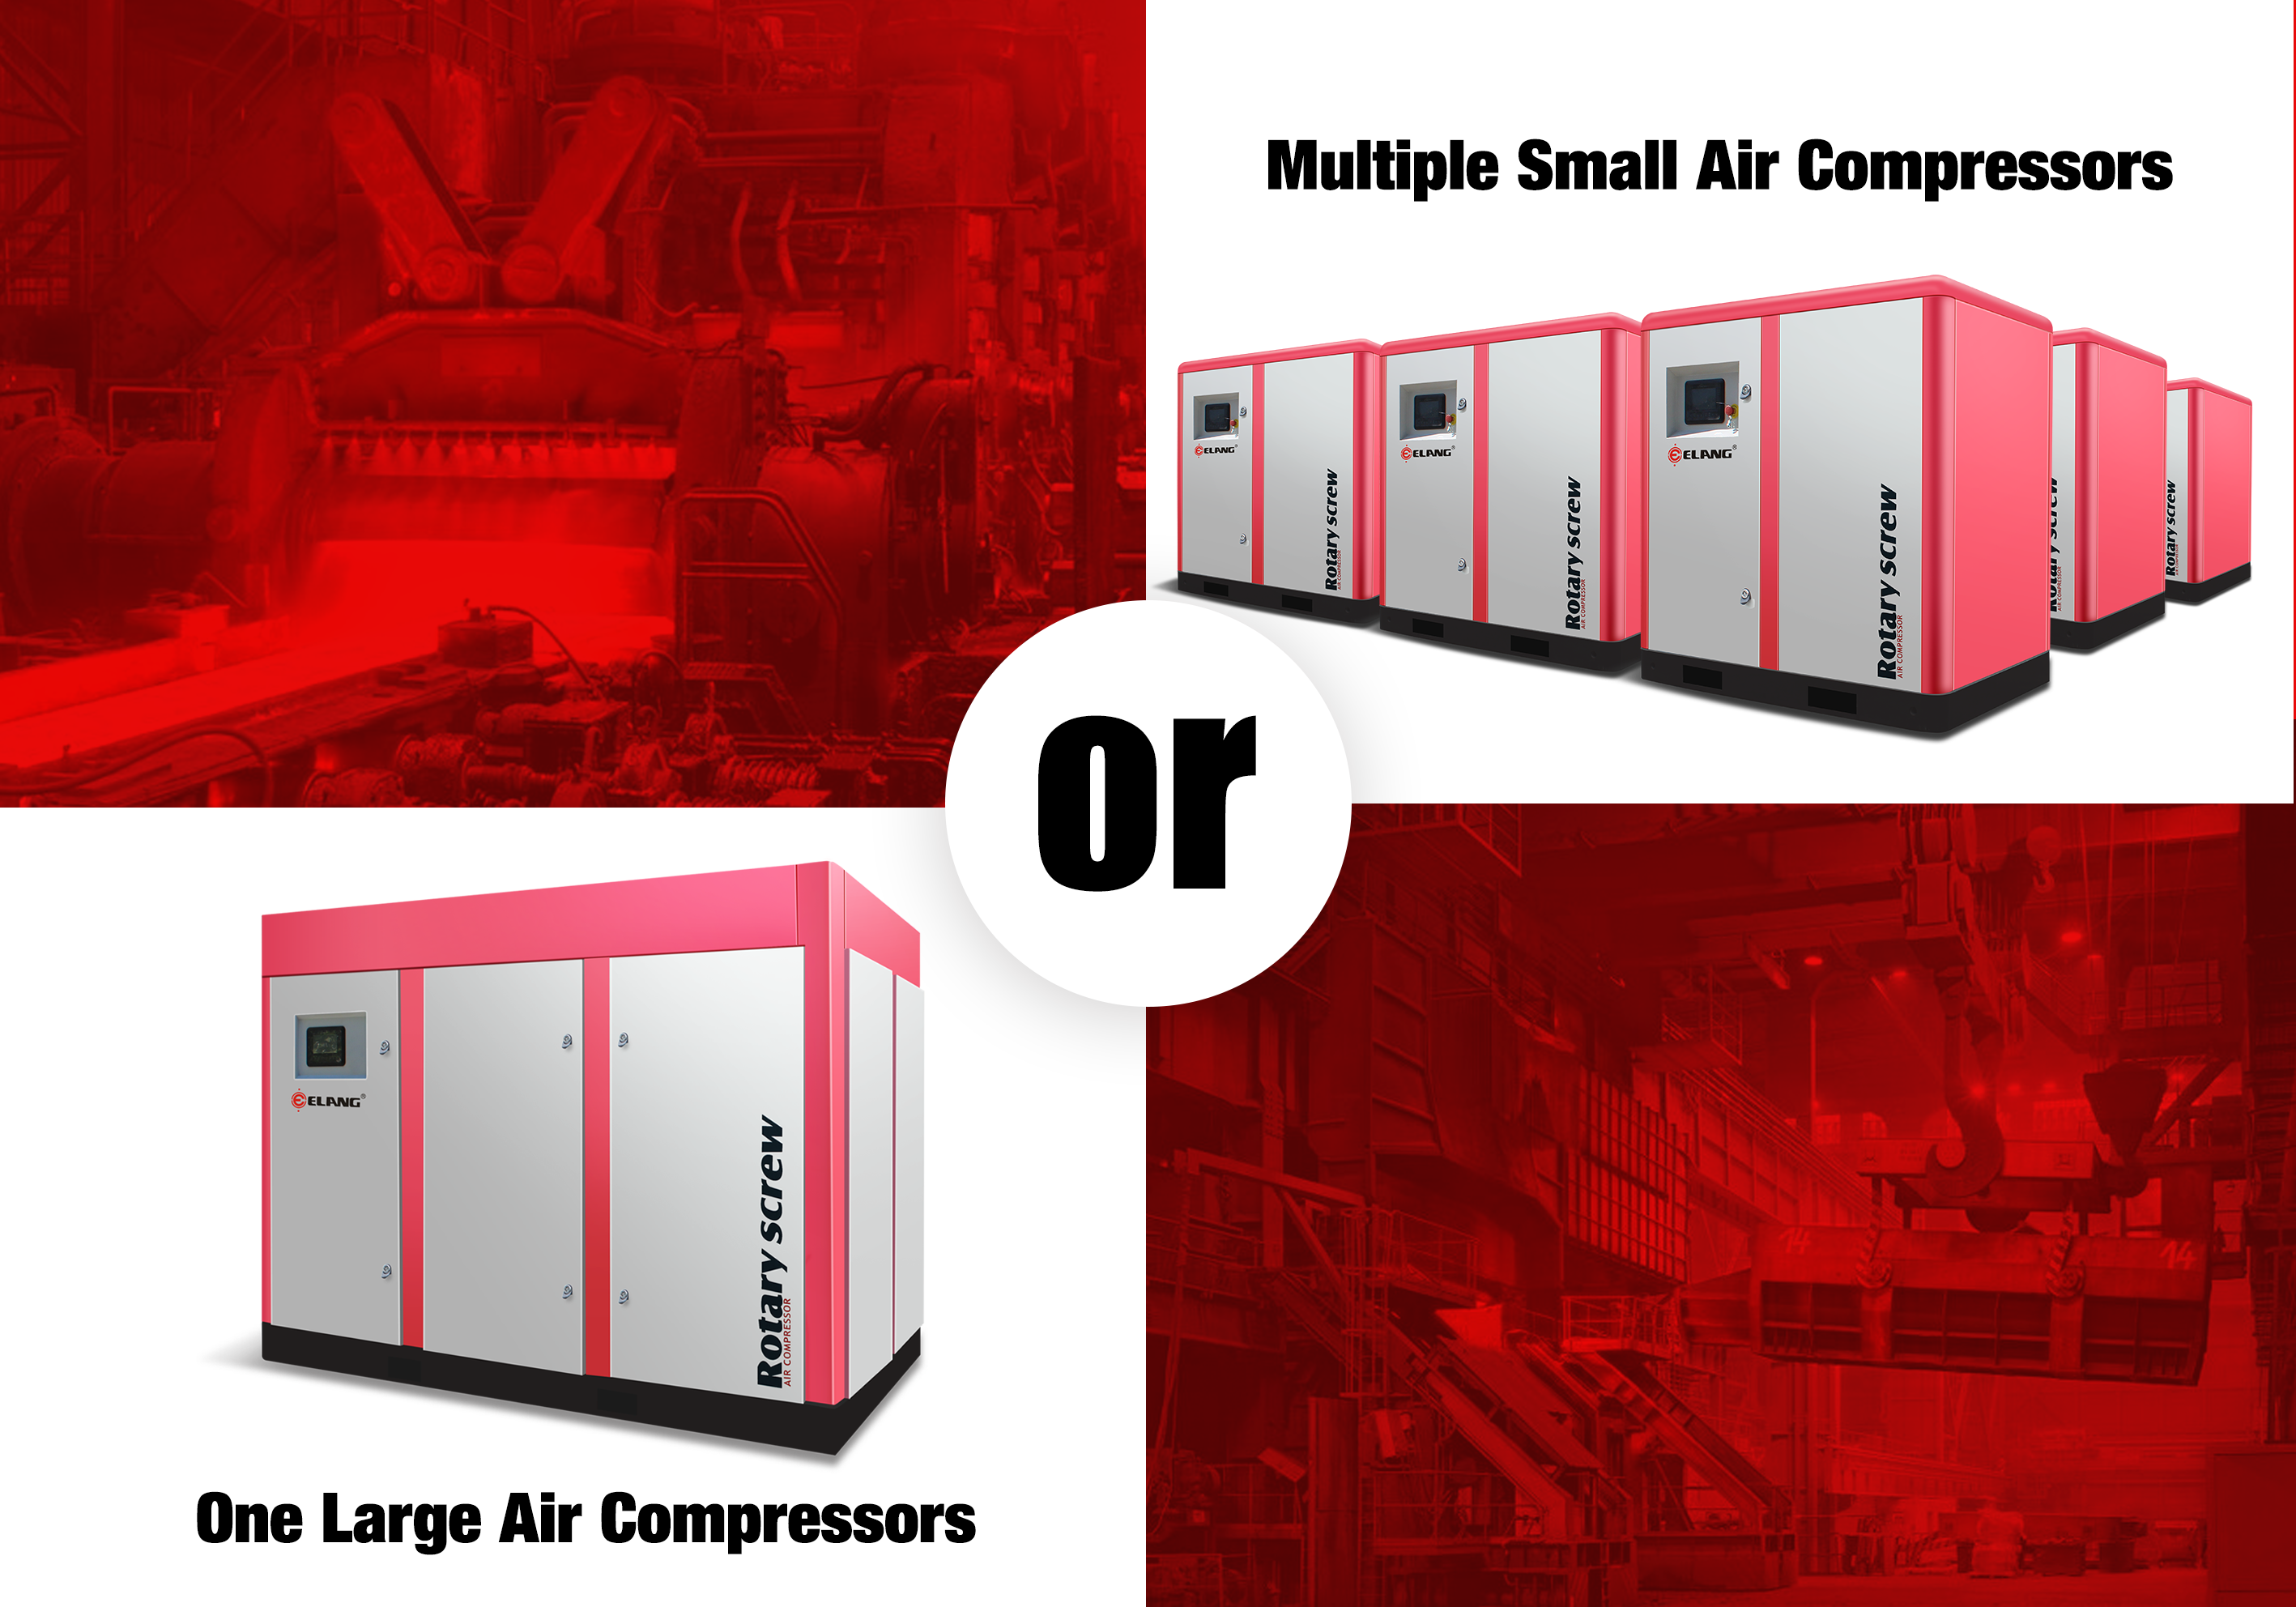 Choose One Large Air Compressors or Multiple Small Air Compressors